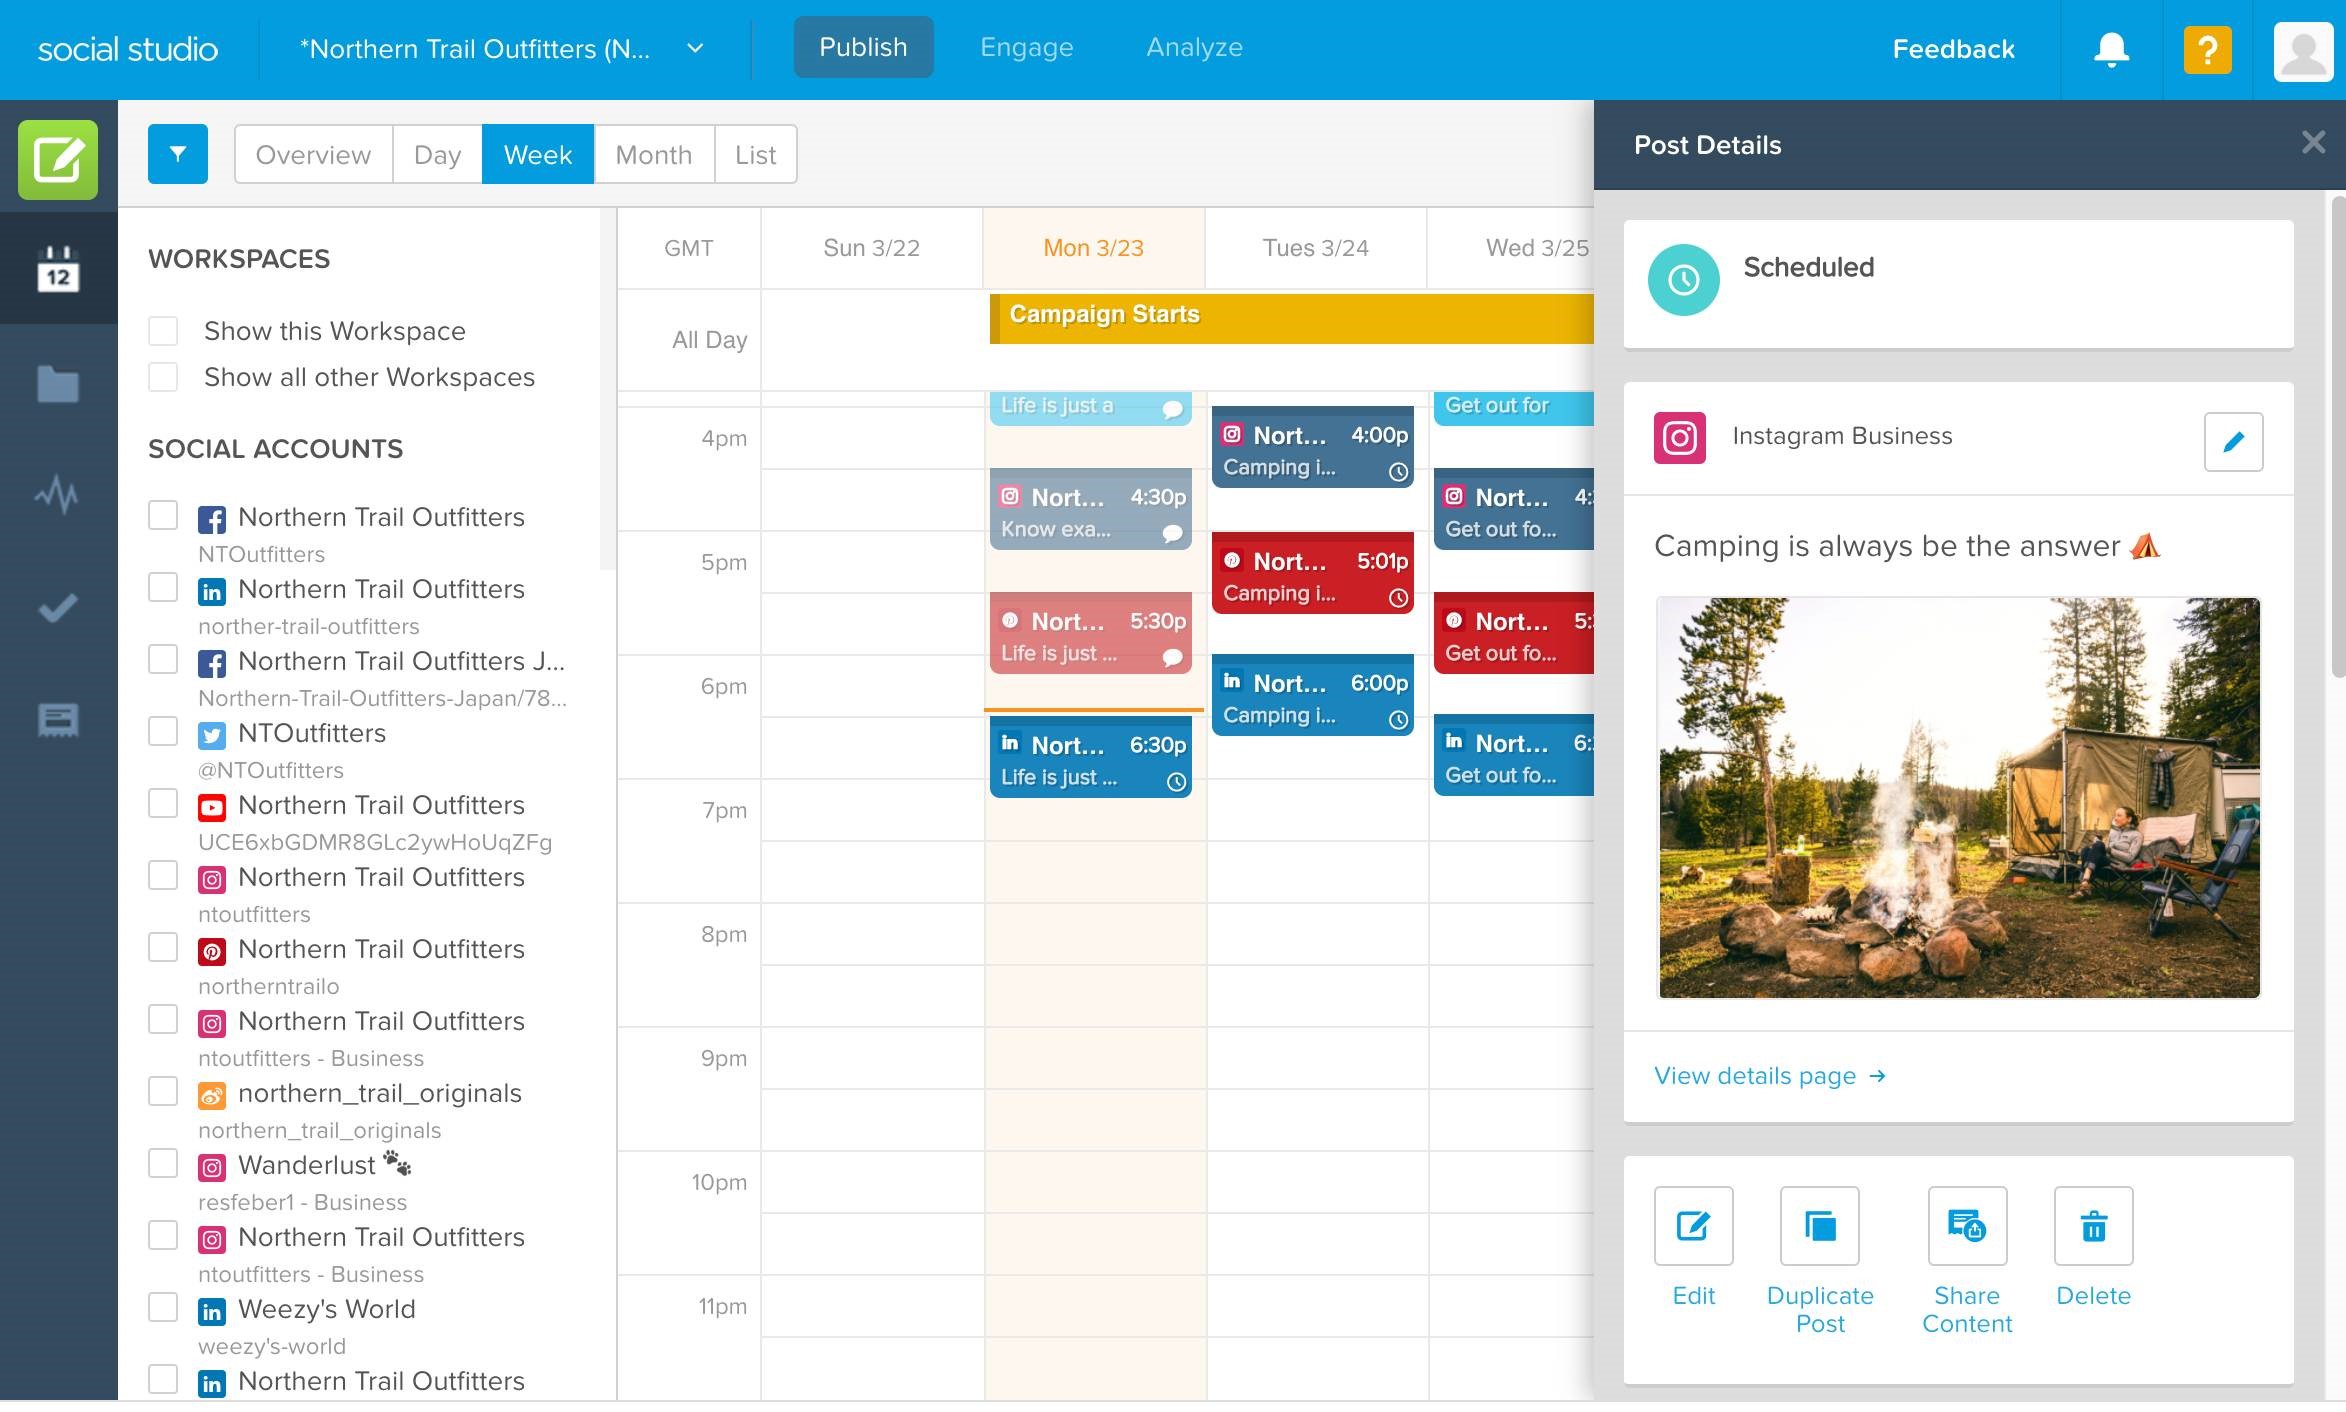 Content Calendar in Social Studio with post details of a photo of a camping place